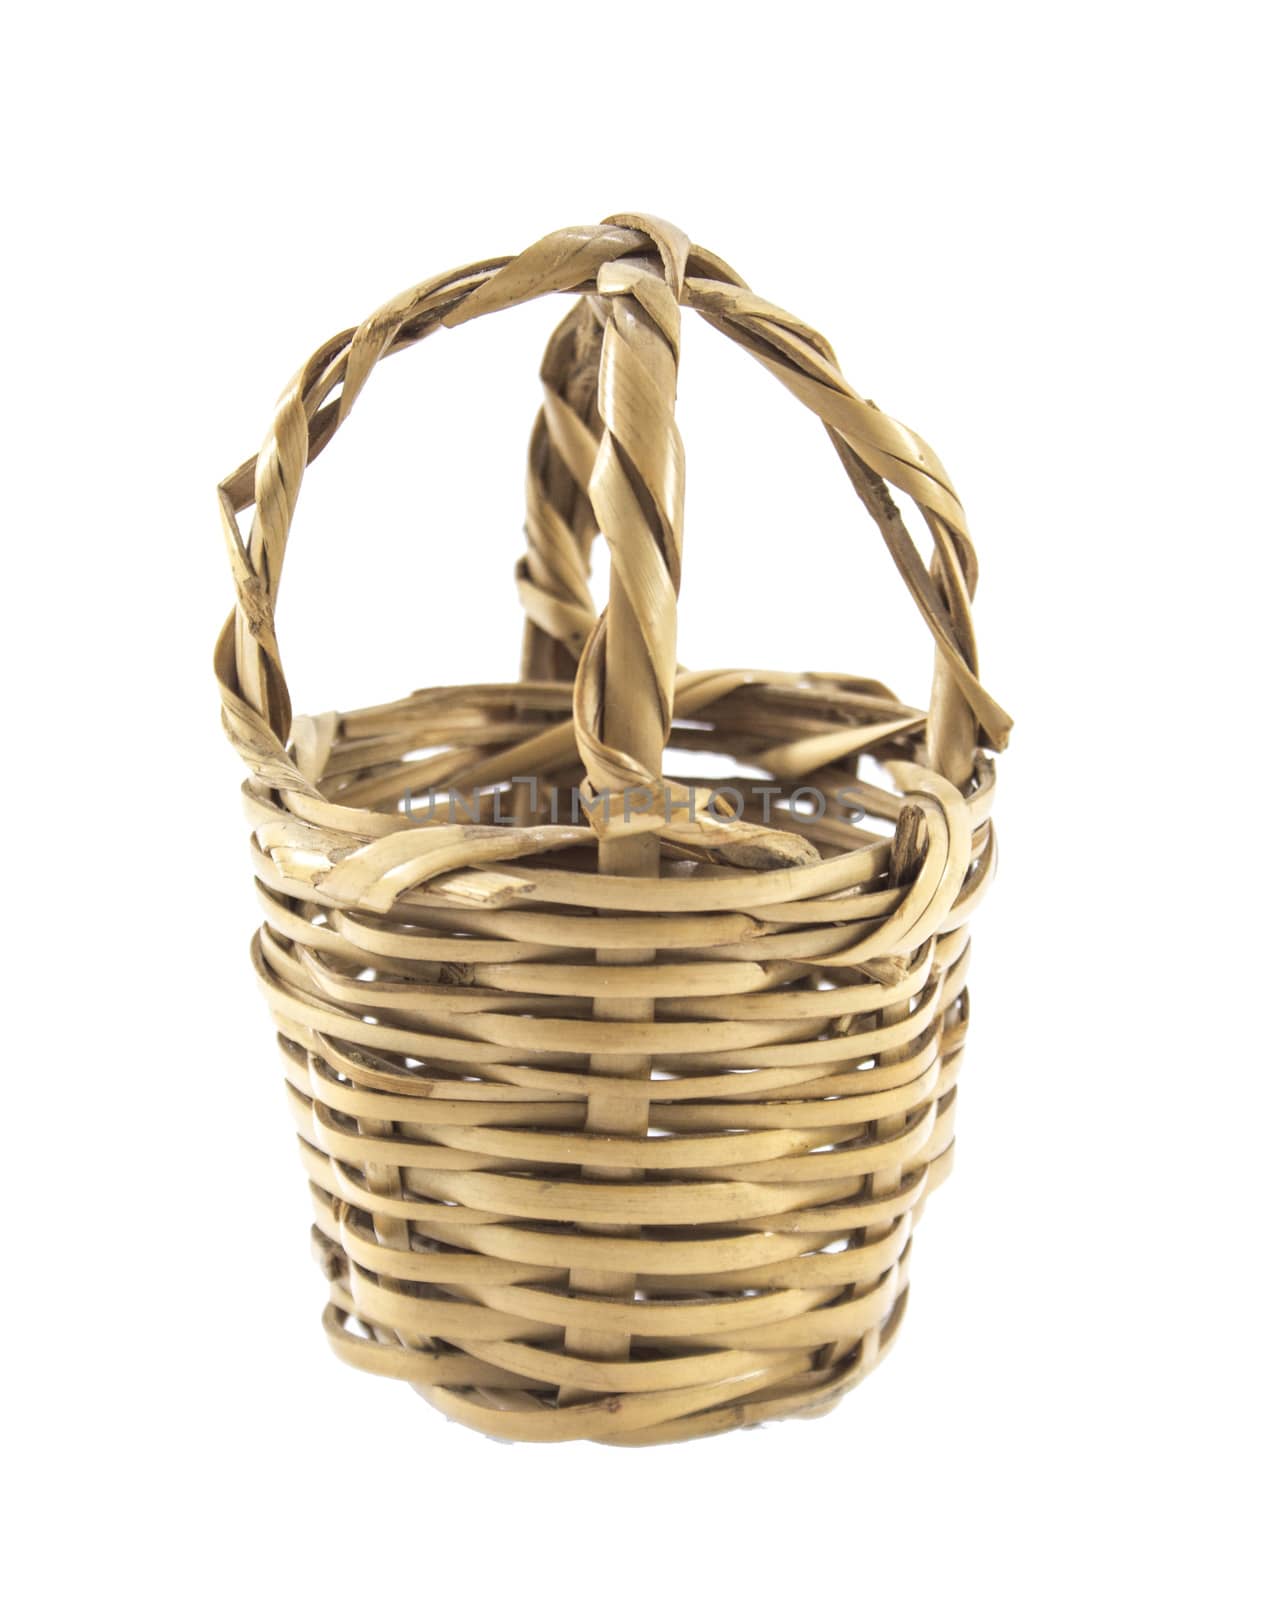 Small empty wicker basket isolated on white background